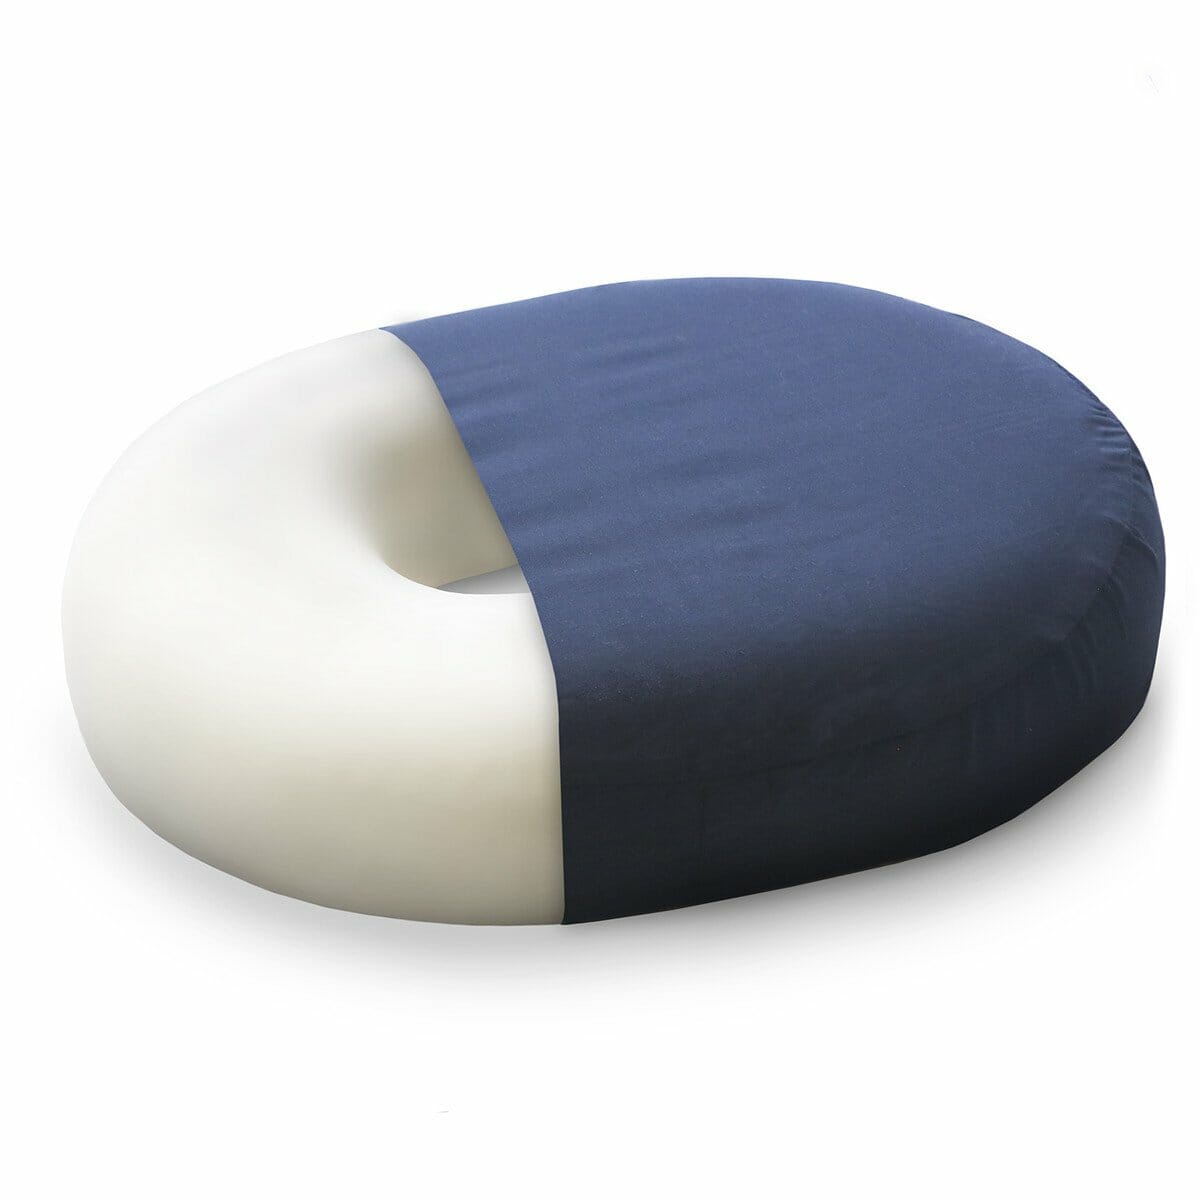 How To Make Donut Seat Cushion for Long Sitting